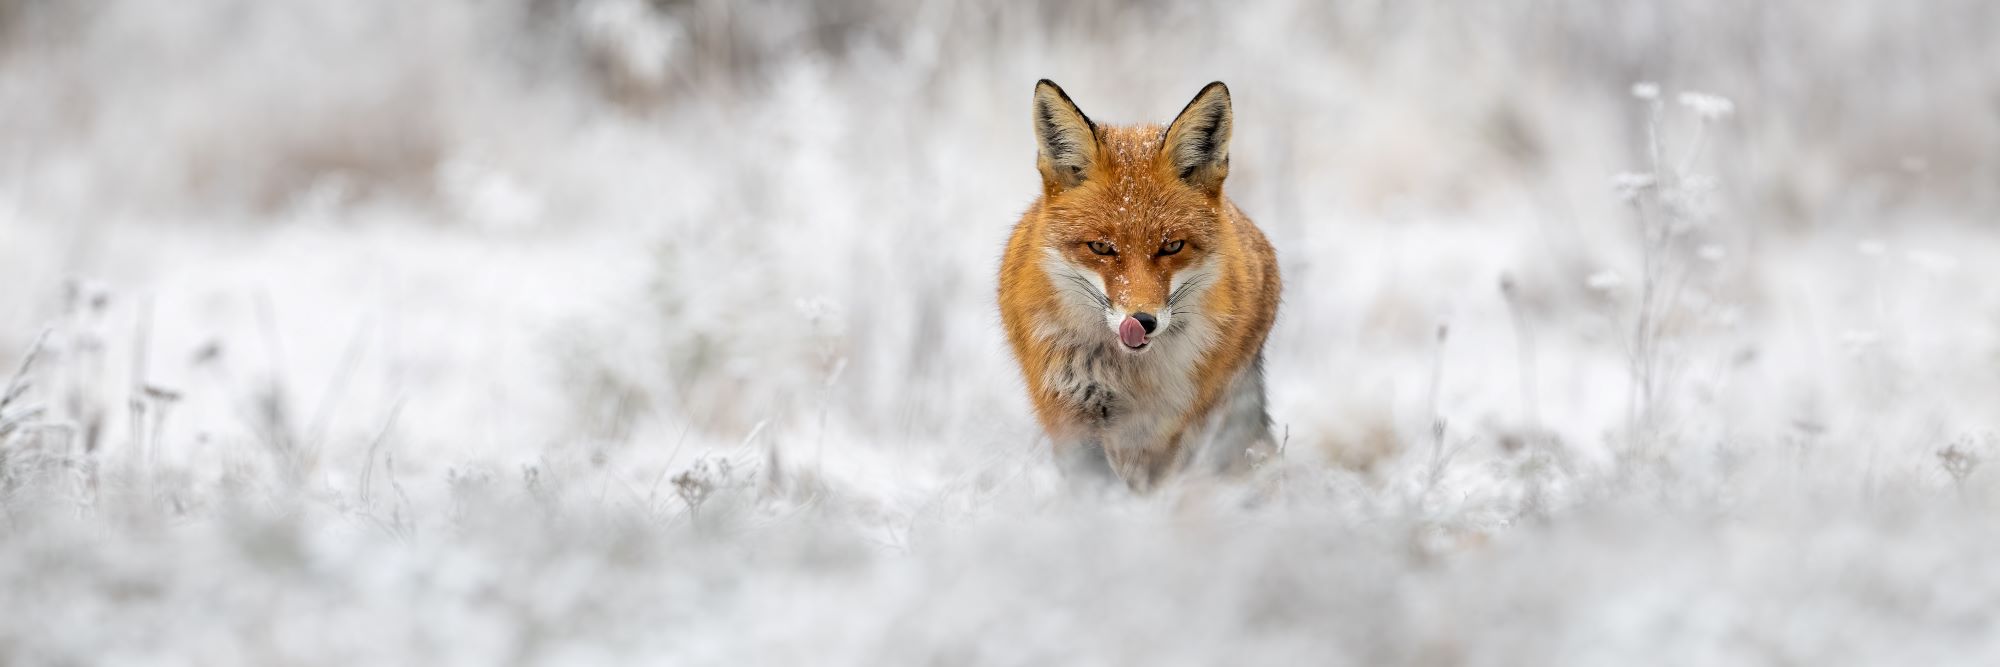 A red fox in winter.